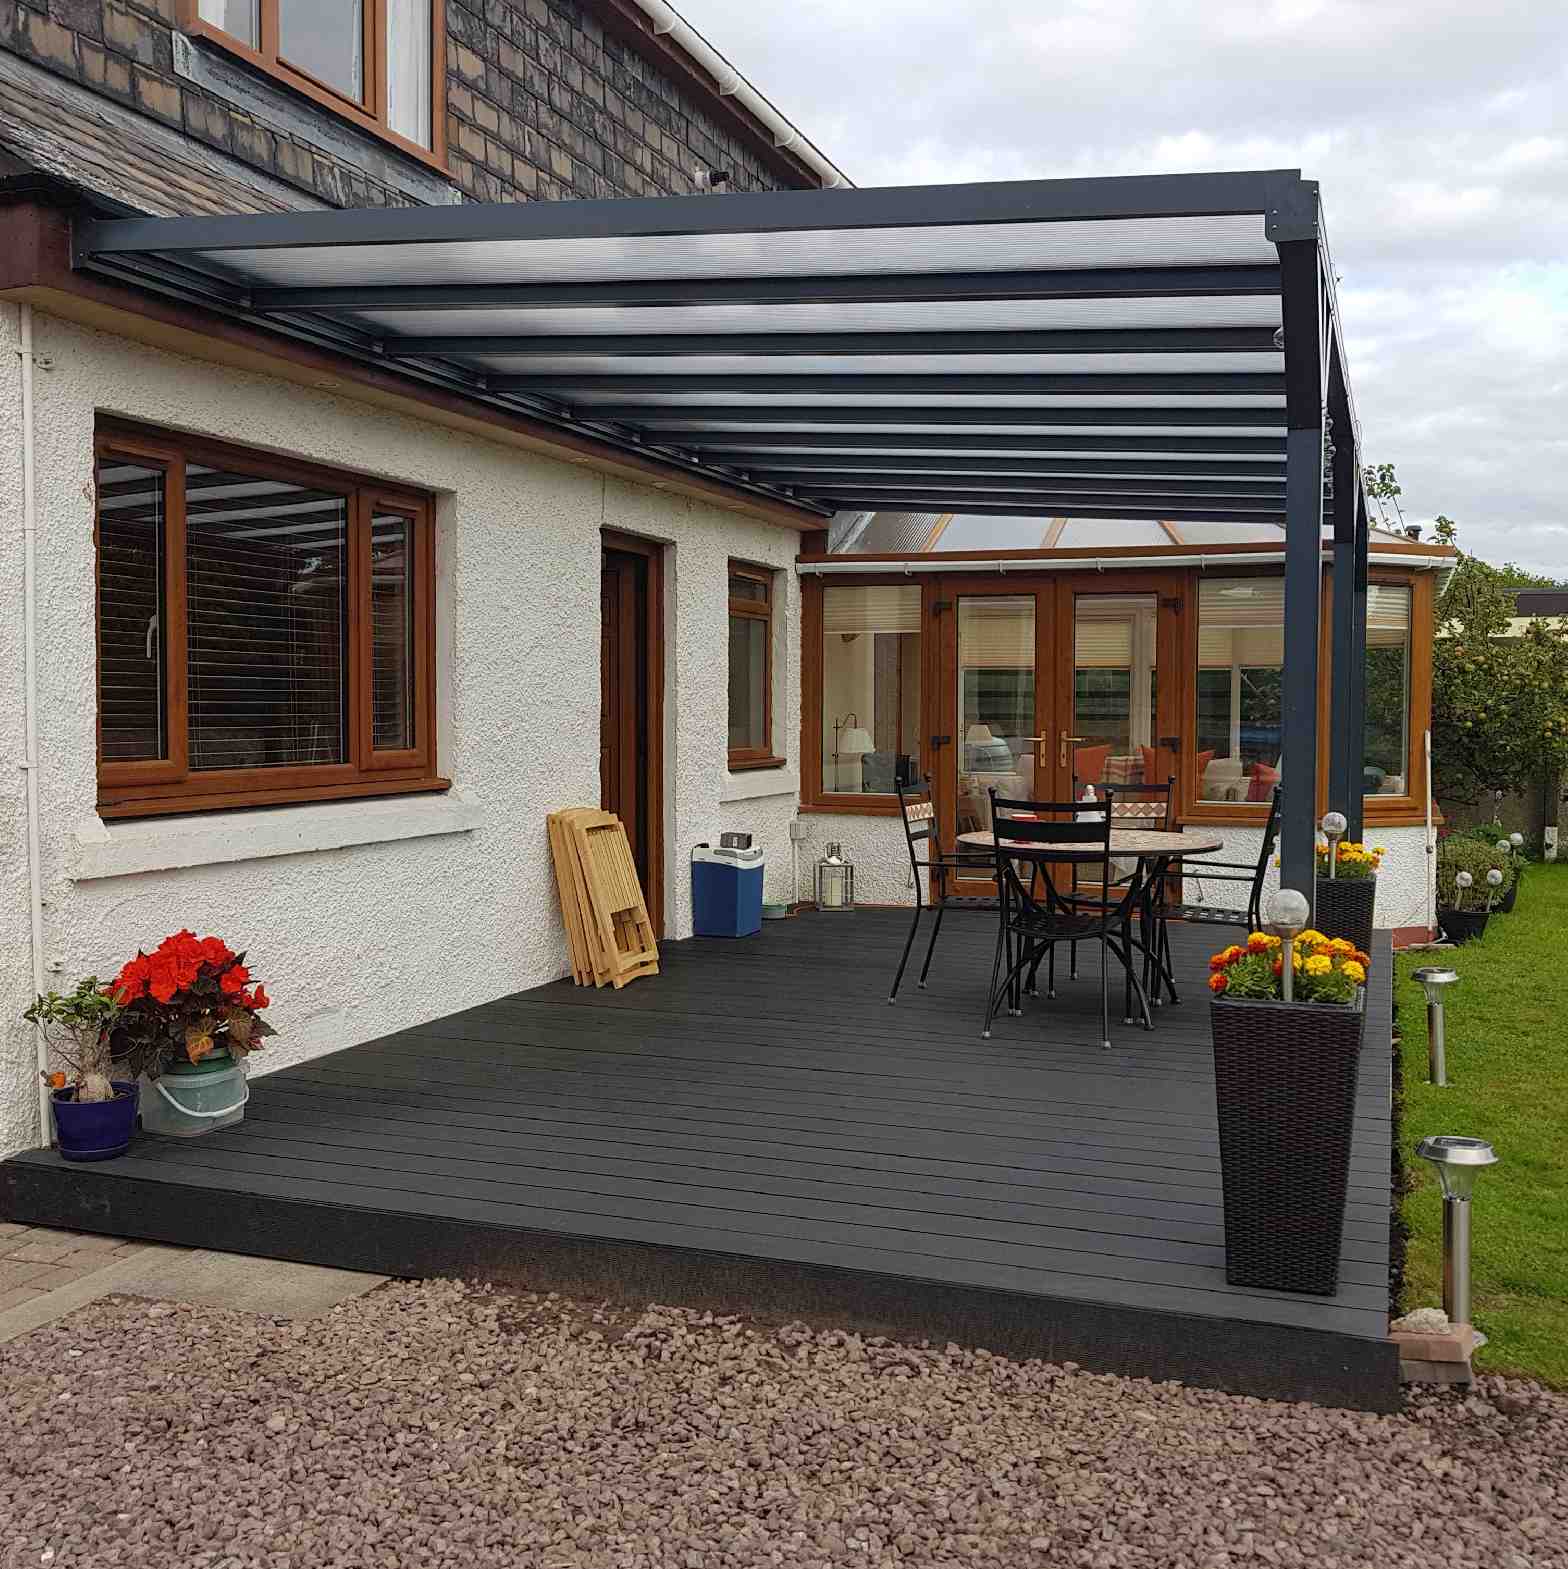 Buy Omega Verandah, Anthracite Grey, 16mm Polycarbonate Glazing - 9.2m (W) x 3.5m (P), (5) Supporting Posts online today